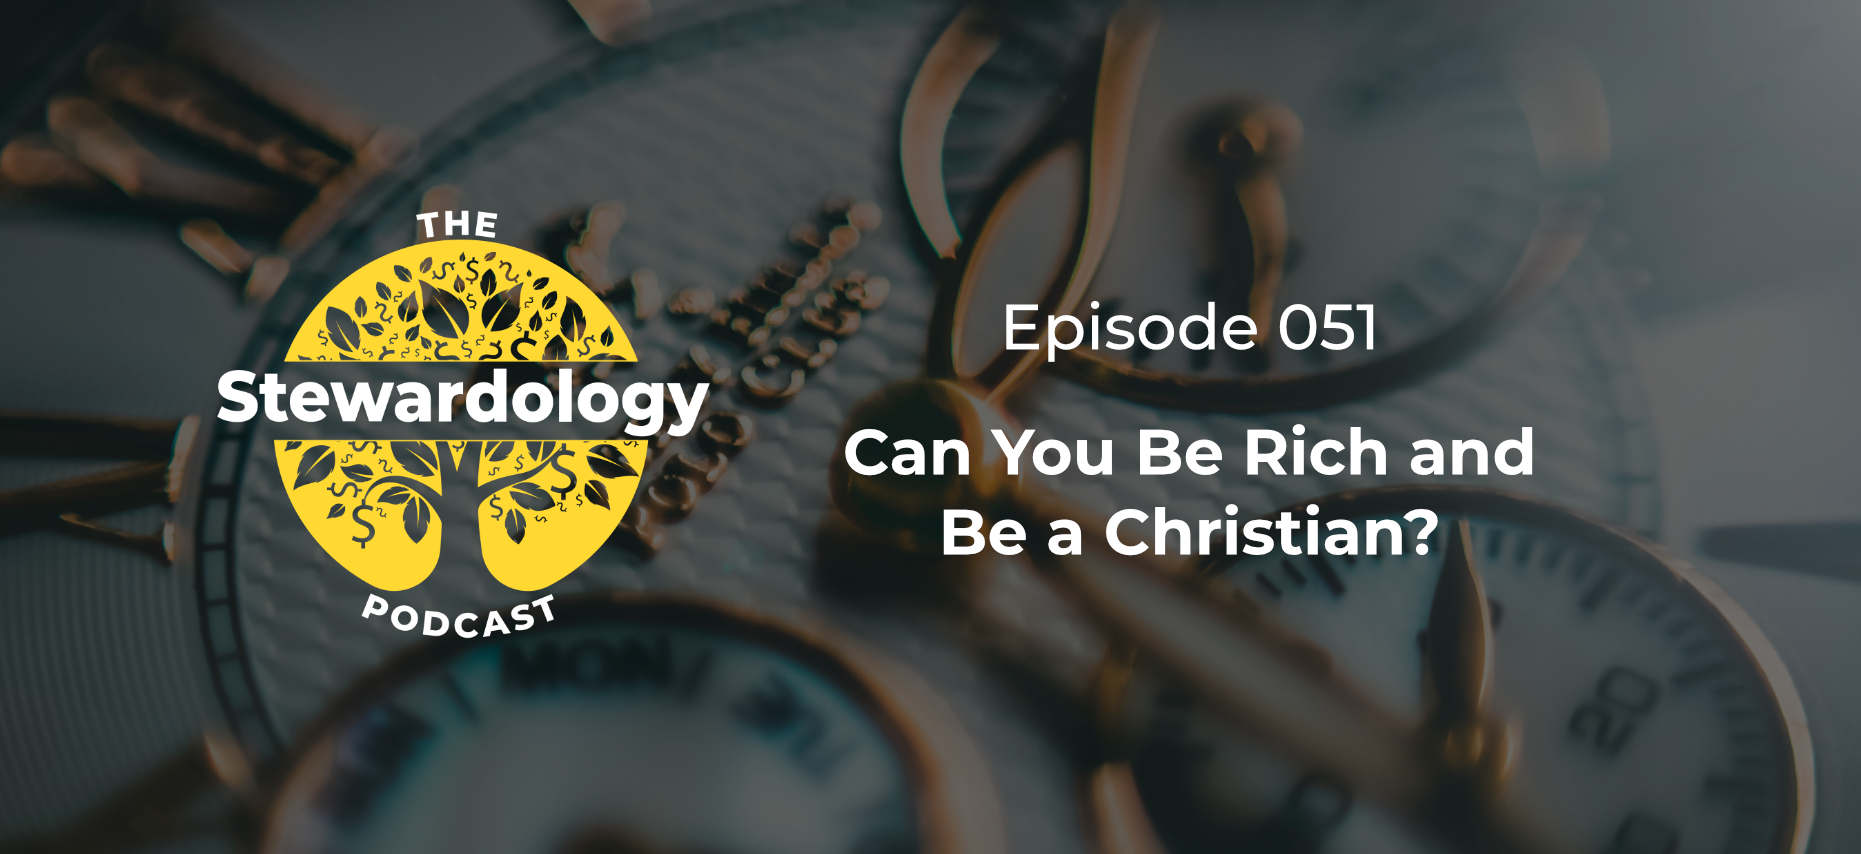 Can christians be rich?